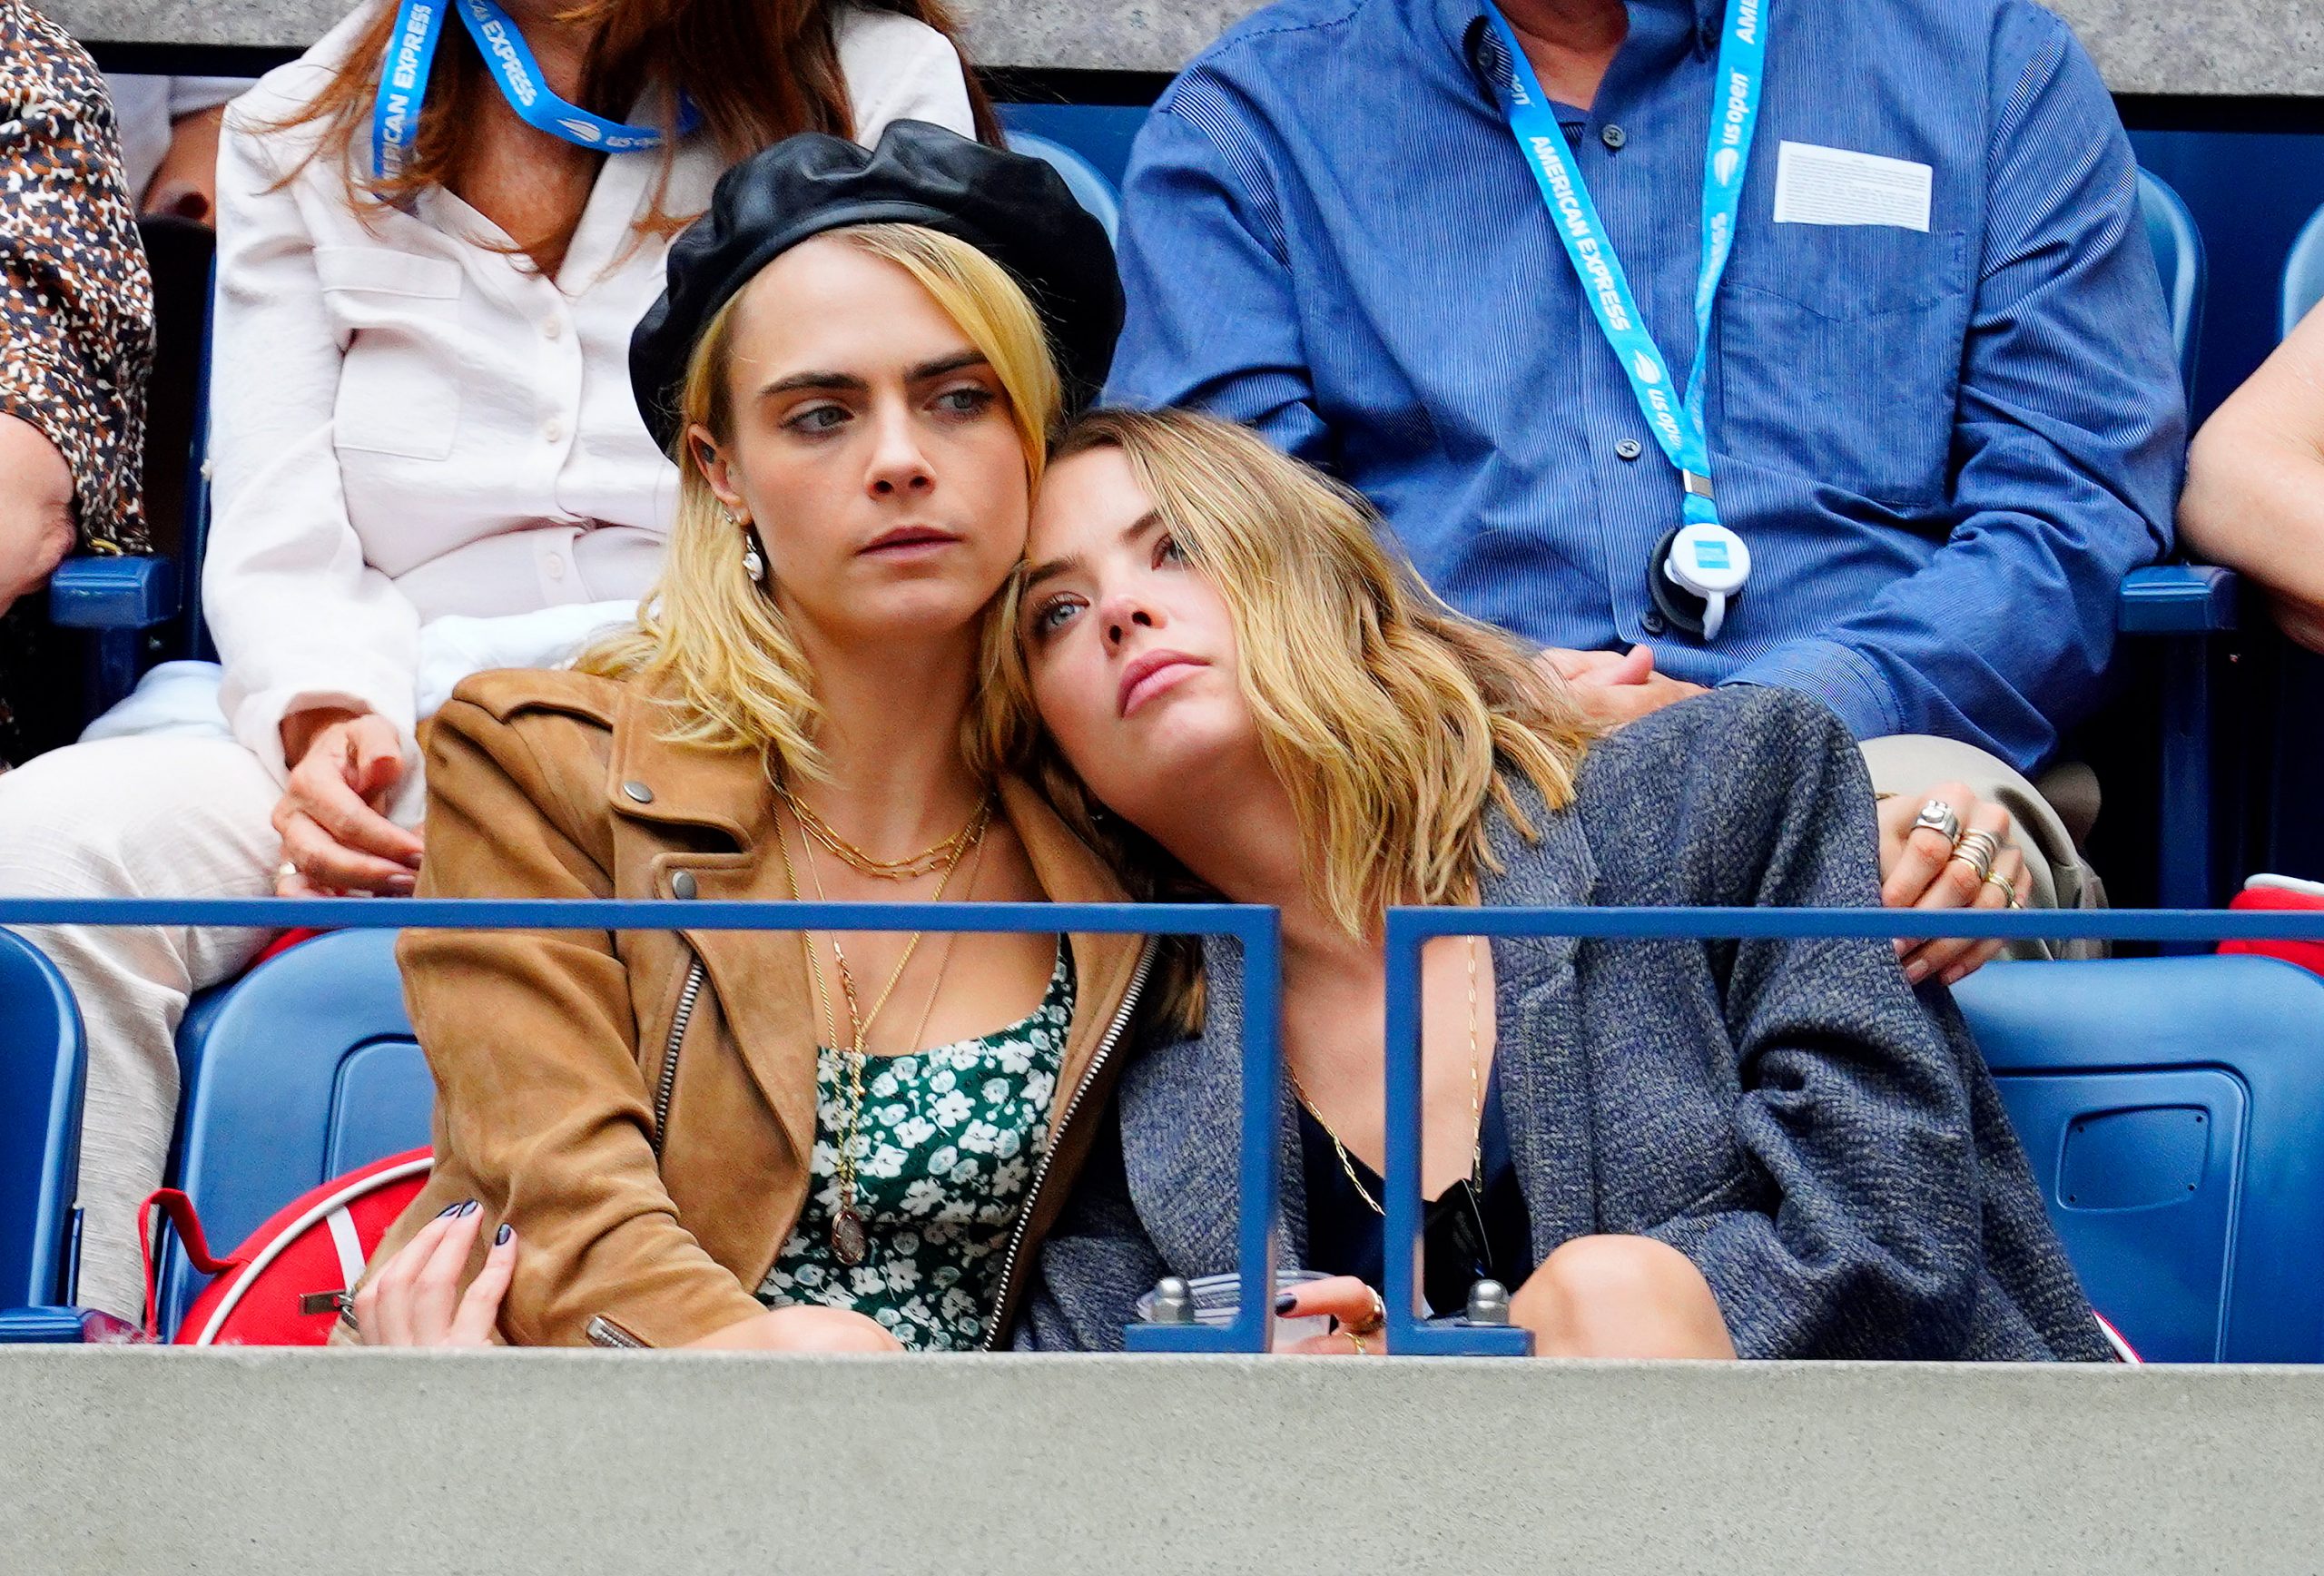 Cara Delevingne And Ashley Bensons Sex Bench Photos Caused Issues 